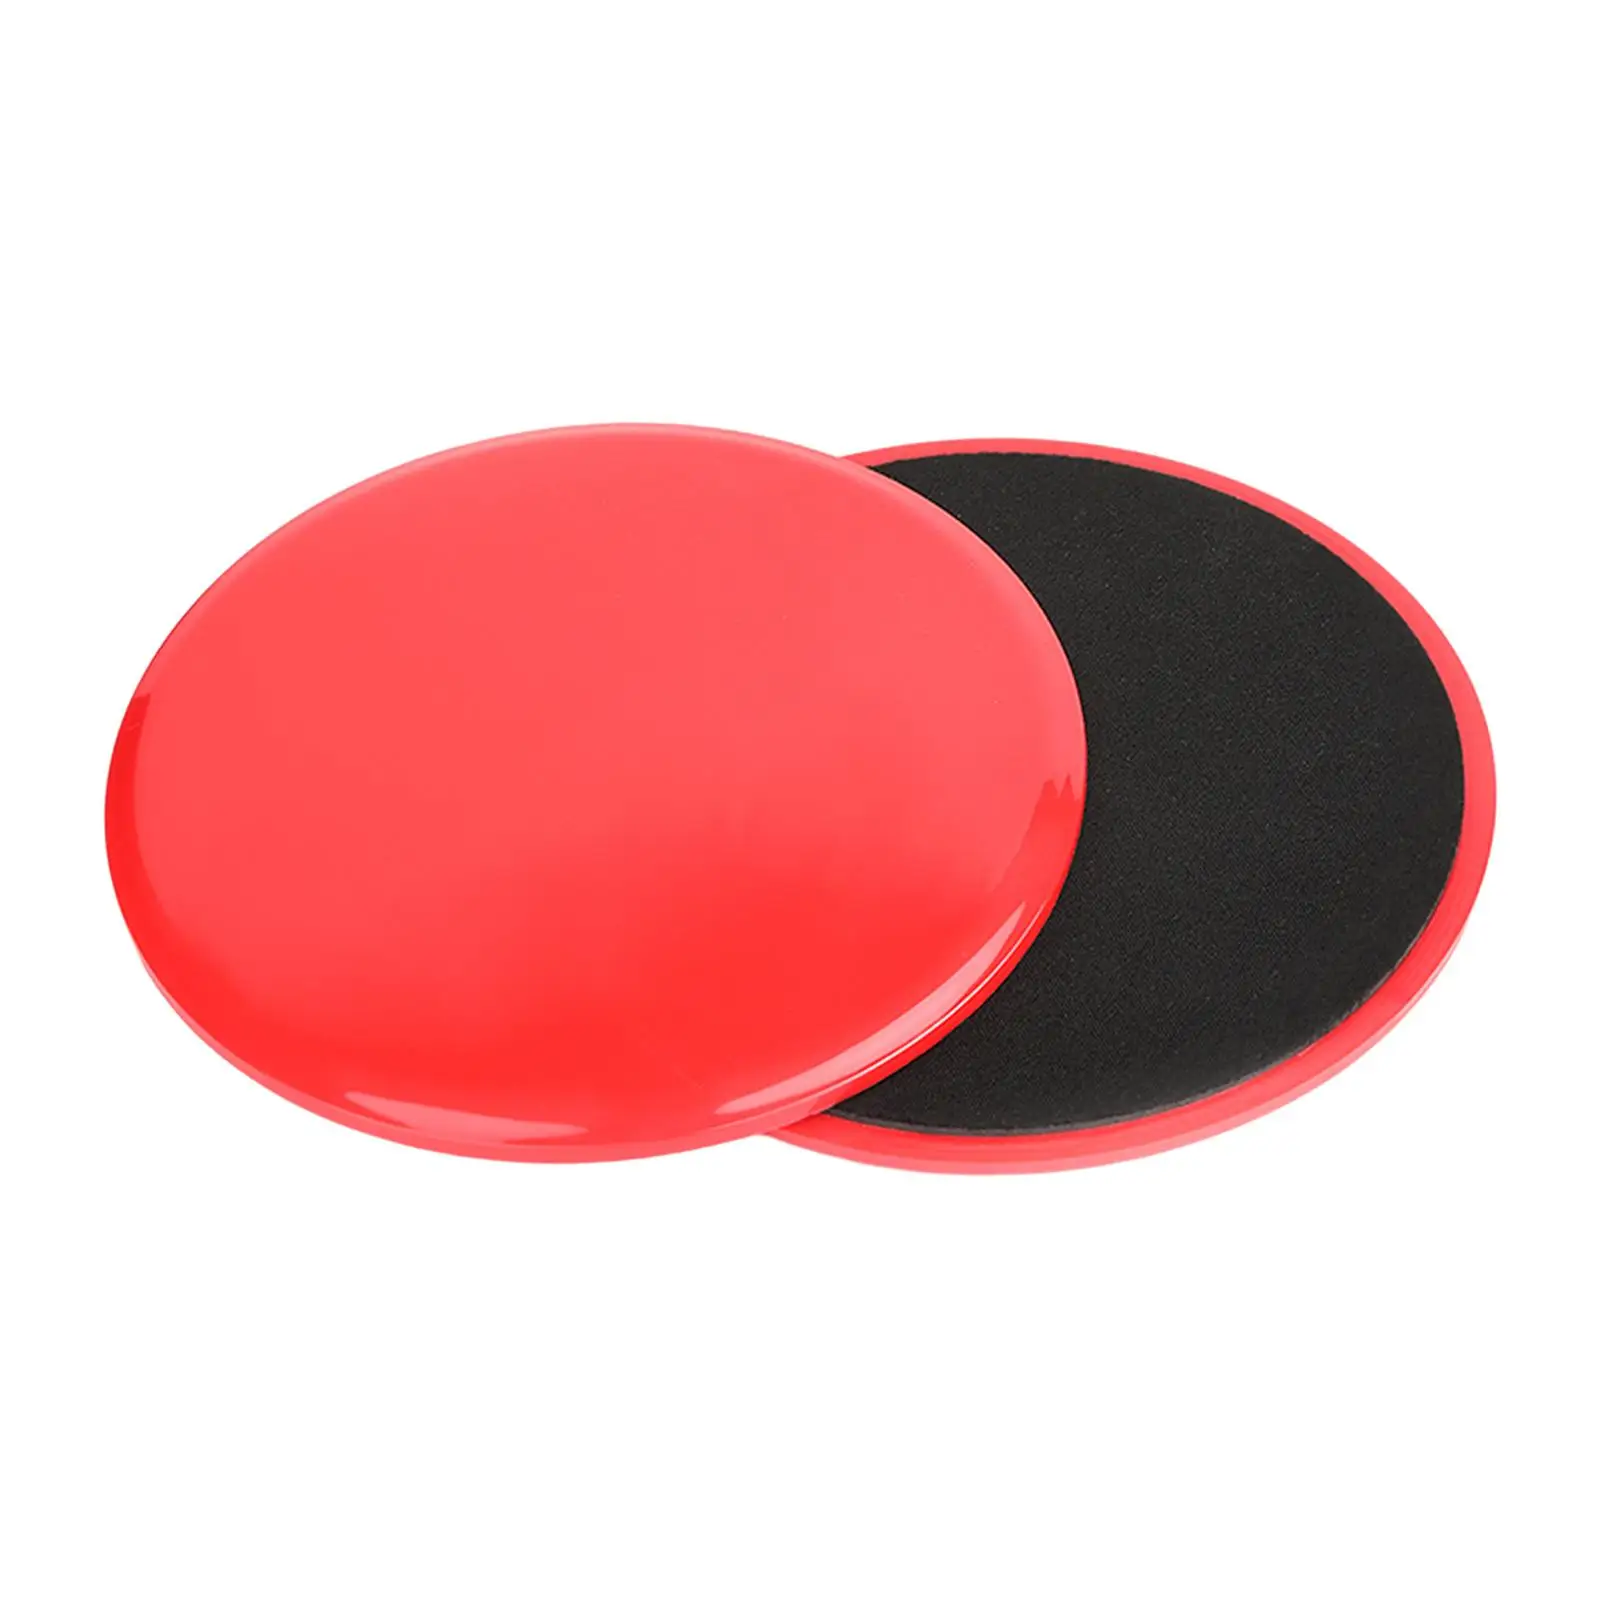 2 Pieces Core Sliders Fitness Discs Exercise Equipment Fitness Apparatus for